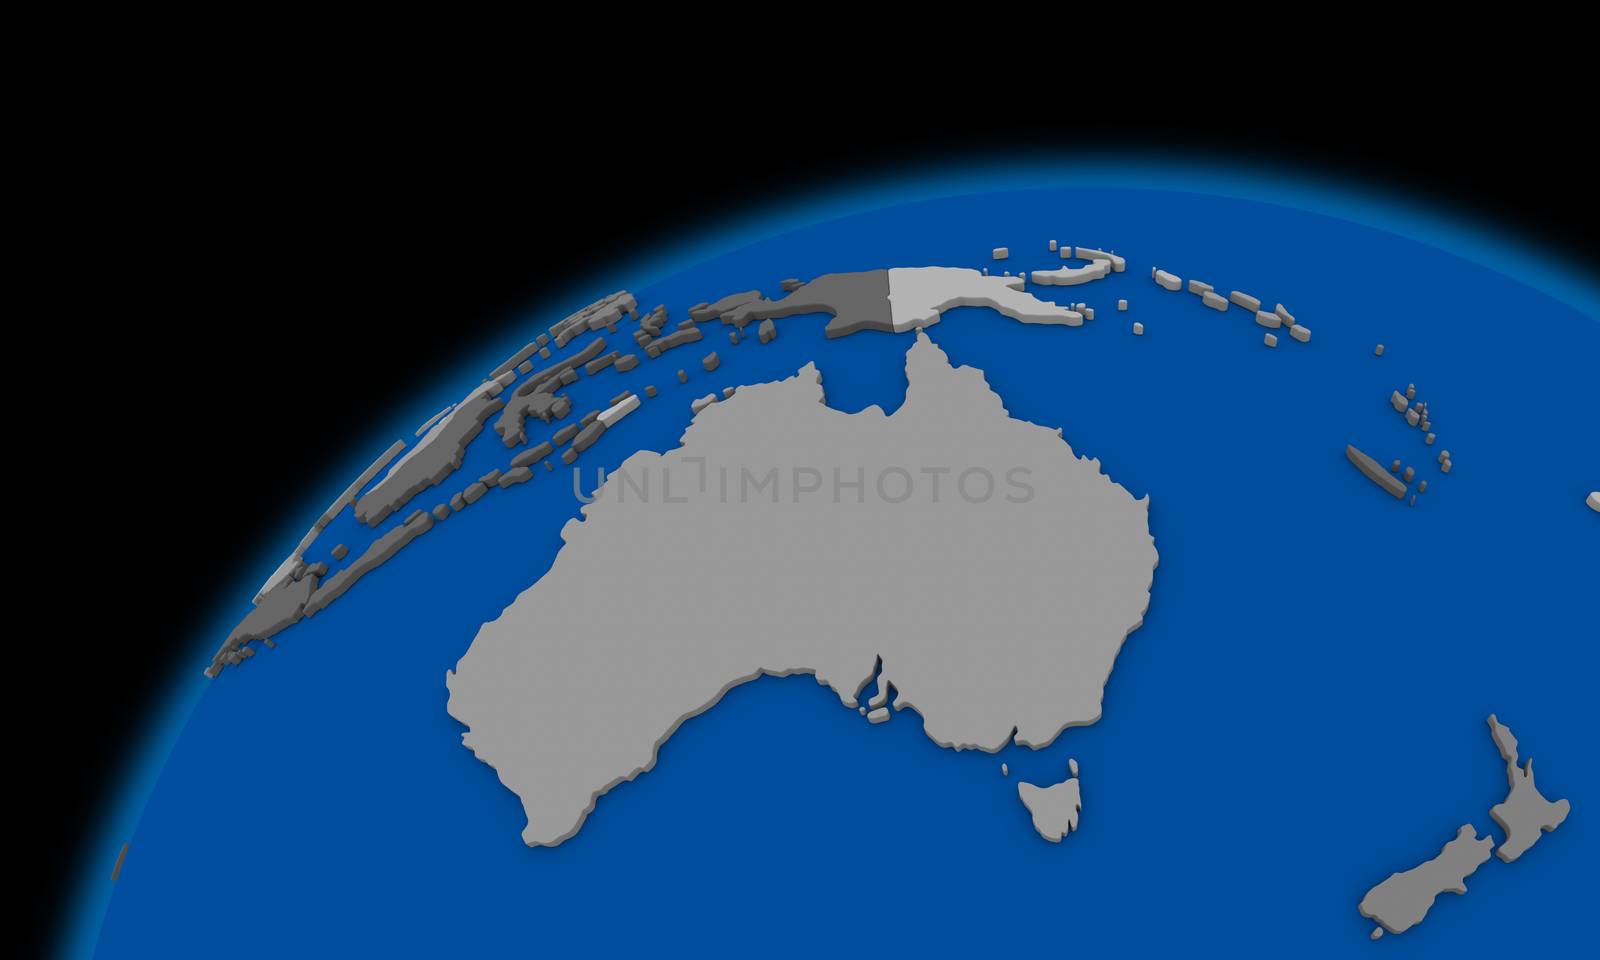 Australia on planet Earth political map by Harvepino